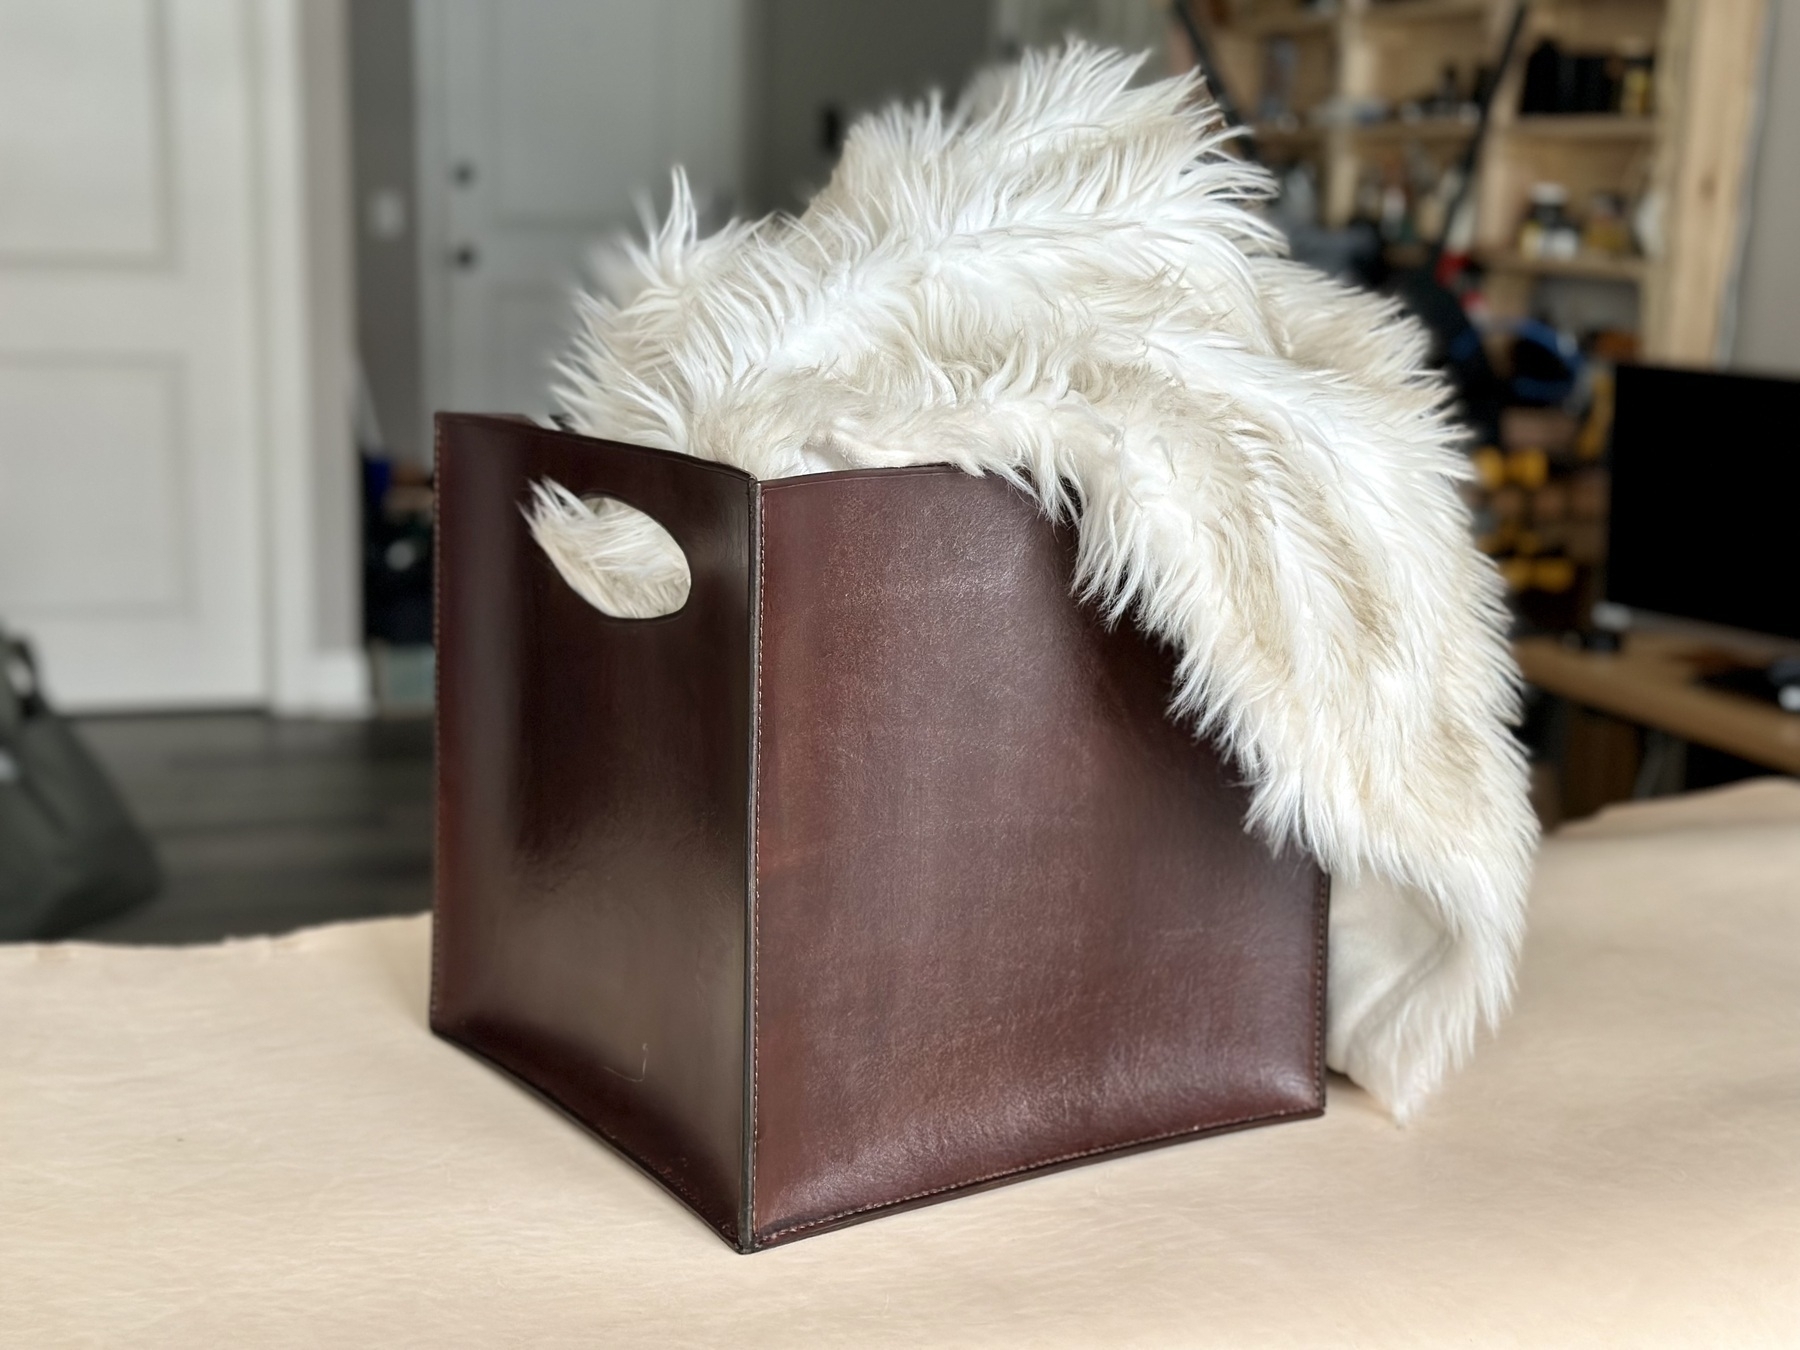 A rather beautiful chocolate dyed leather bin sitting sitting on a table with a large and fluffy white blanket protruding from the top. The bin itself is 12 inches square and has handles cut out on two sides for easy grabbing.